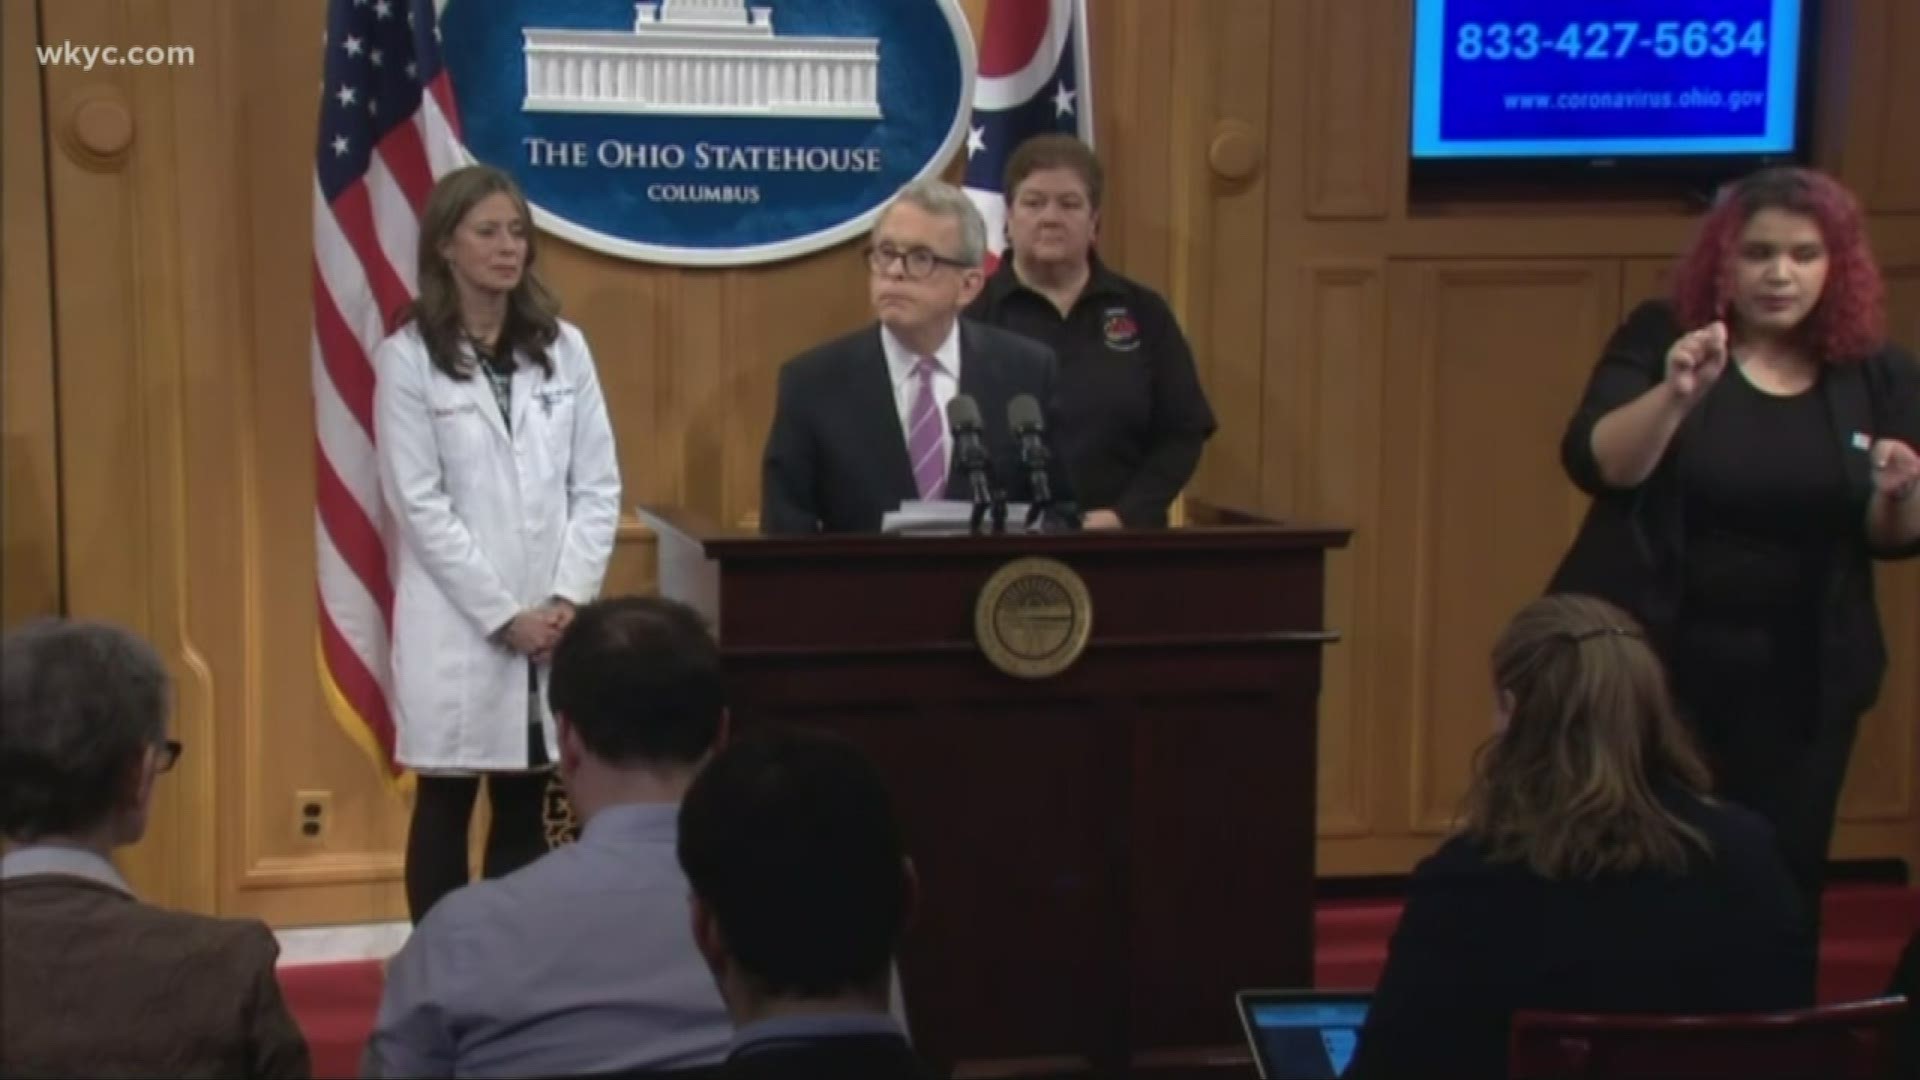 Gov. Mike DeWine has made more recommendations to help stop the spread of coronavirus, at the direction of top Ohio medical officials. 3News' Drew Horansky reports.